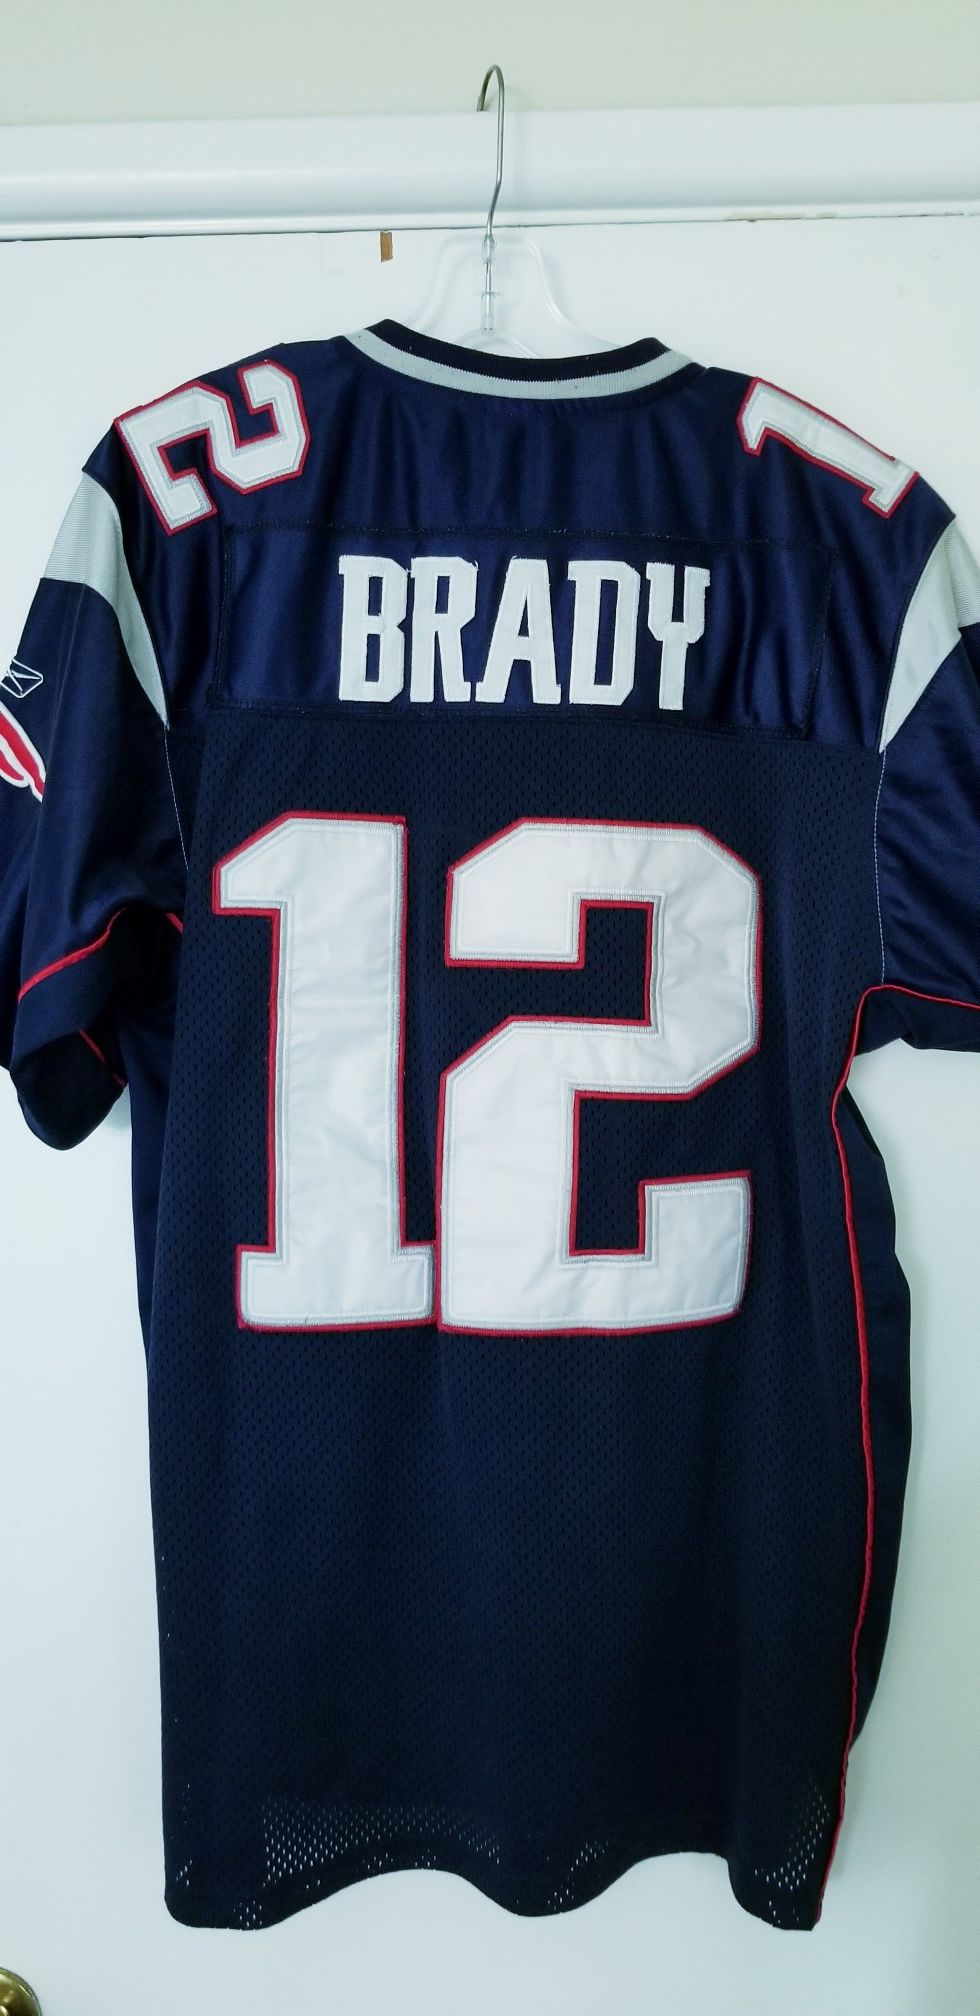 Tom Brady Large Stitched Patriots Jersey in Very Good Condition!